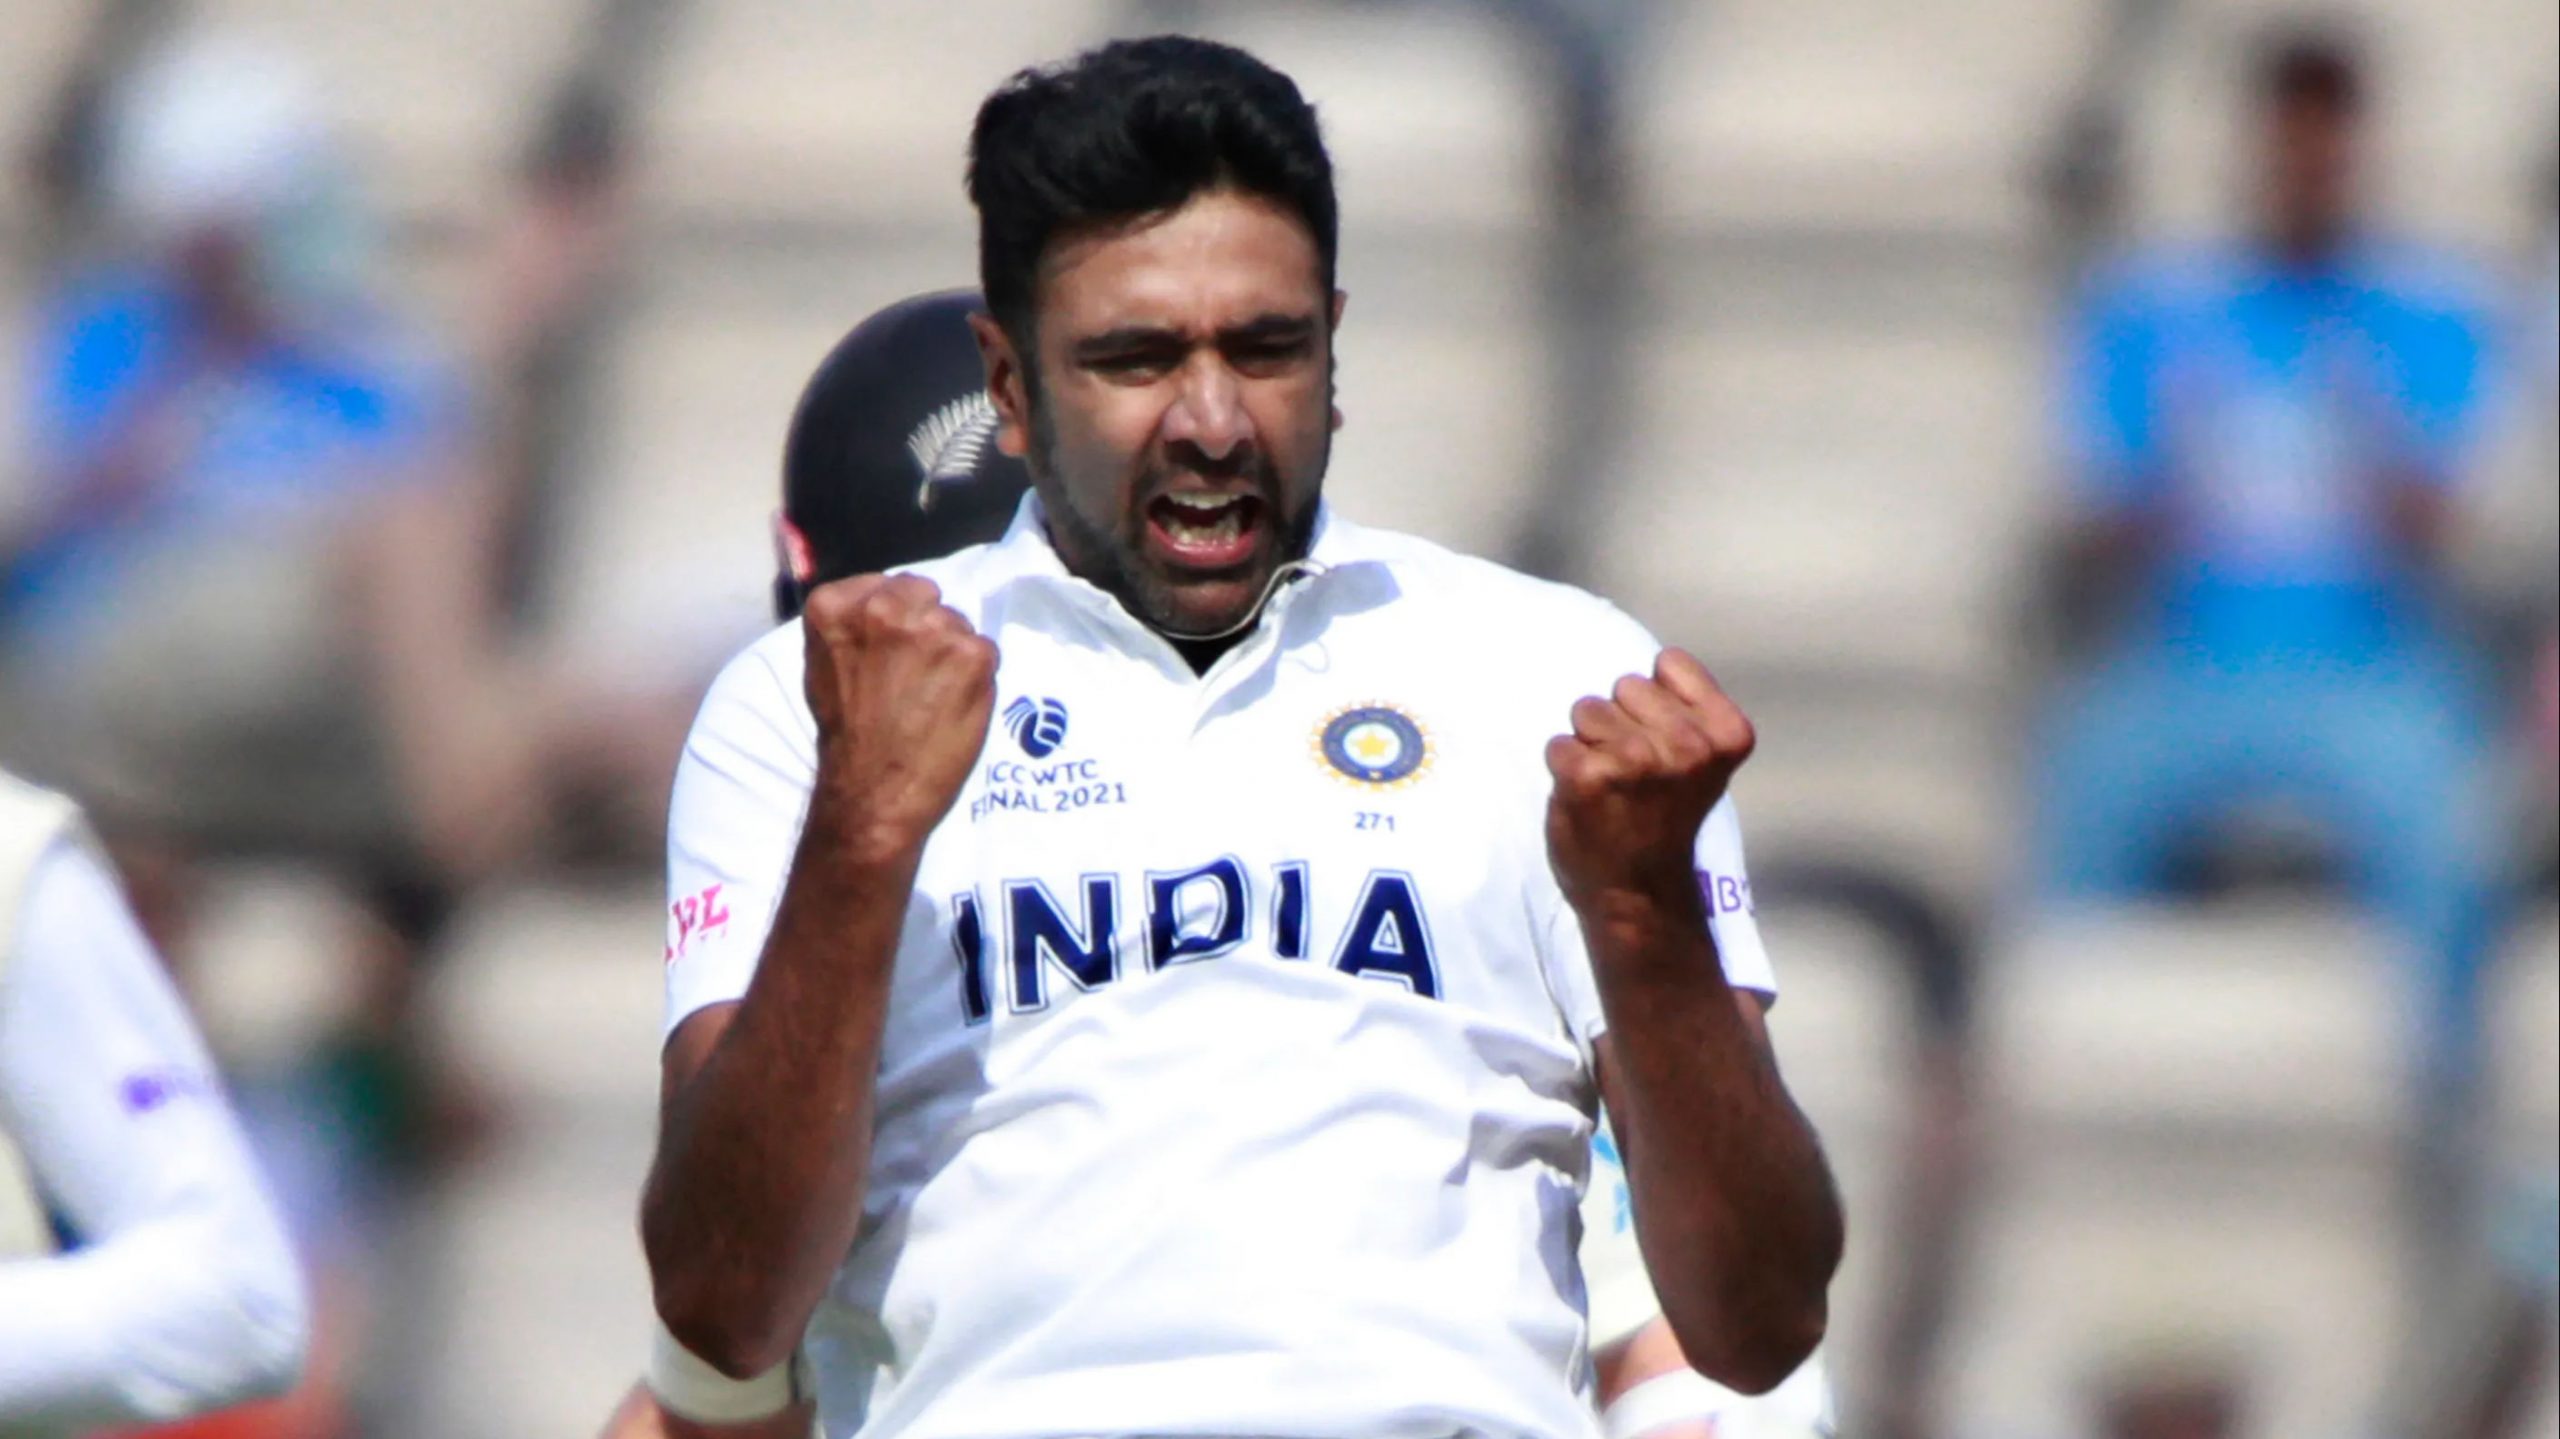 Ashwin overtakes Harbhajan to become India’s 3rd highest wicket-taker in Tests